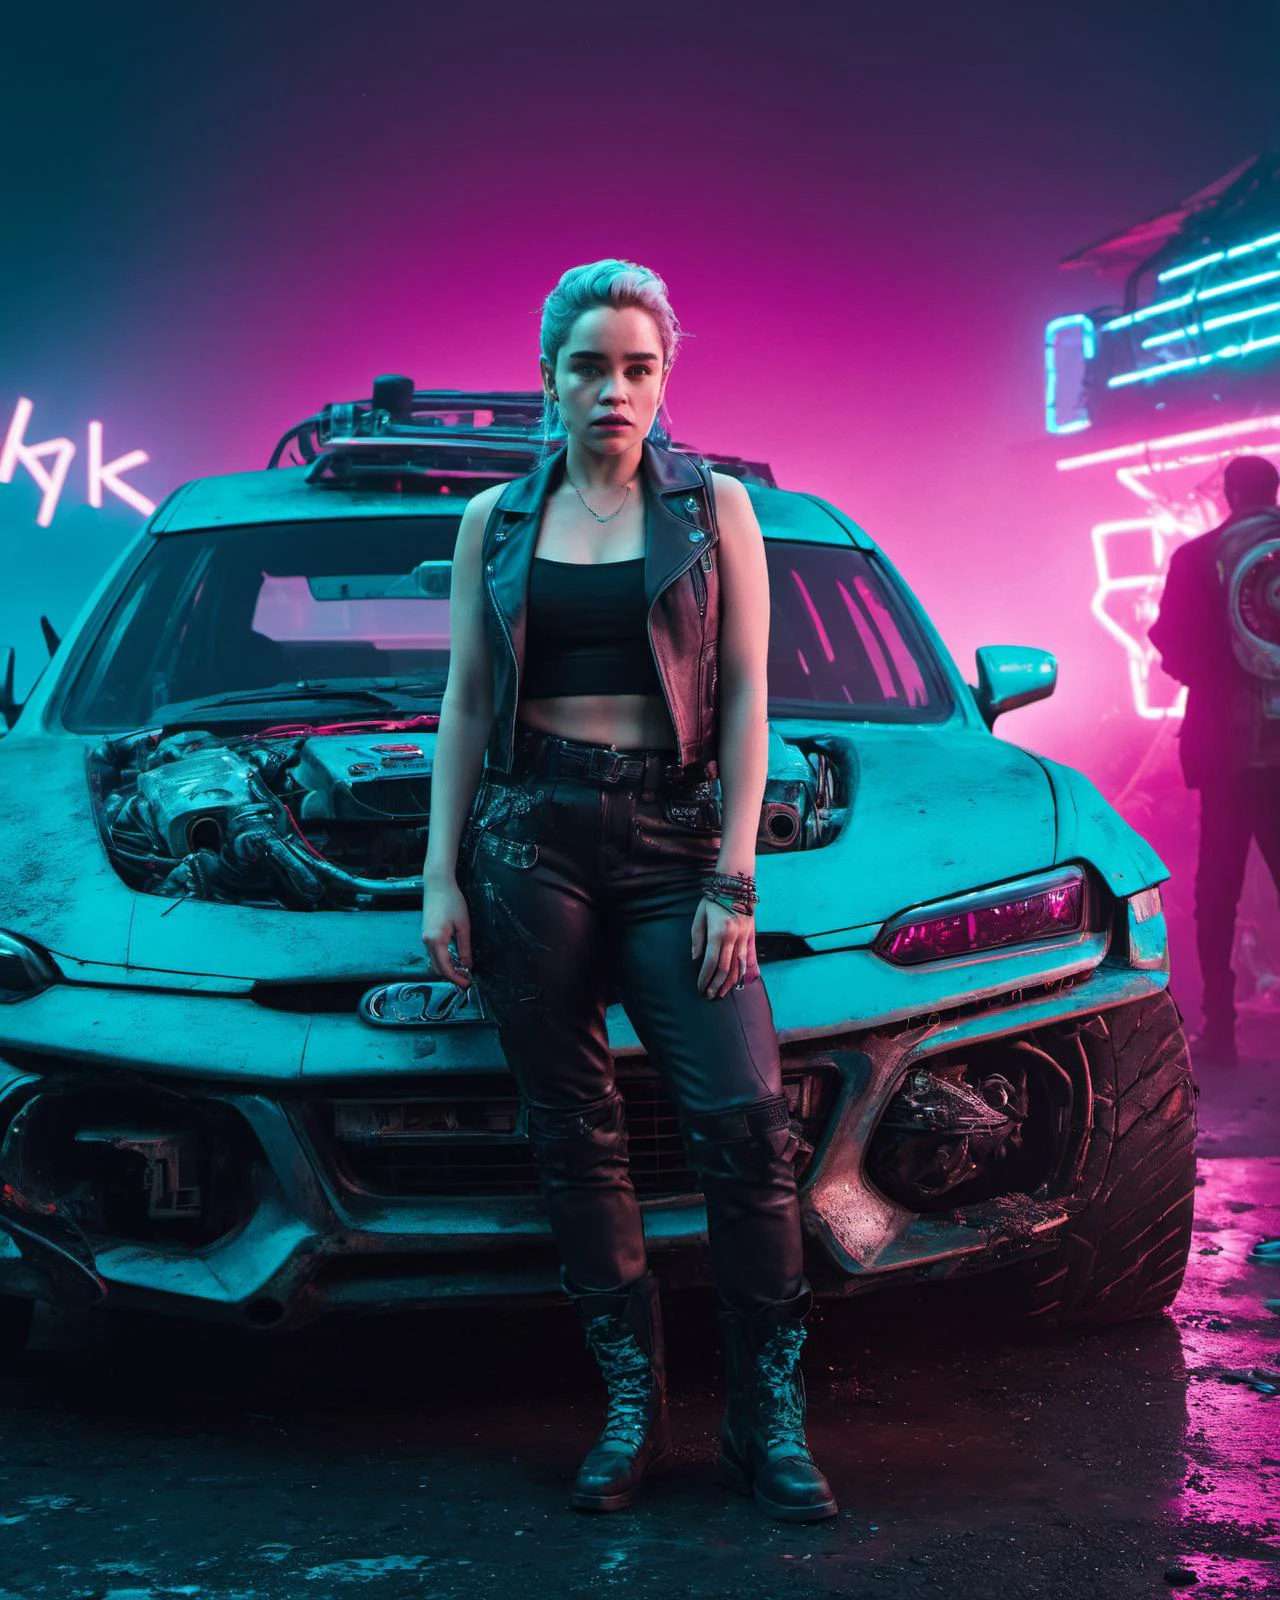 (masterpiece), , (extremely detailed),  (cinematic lighting),(silicone skin texture), (hyperrealistic), (photography),
alluring emilia clarke near cyberpunk rusted car pink and cyan neon lights, punk outfit, junkyard, decadent and dystopian atmosphere